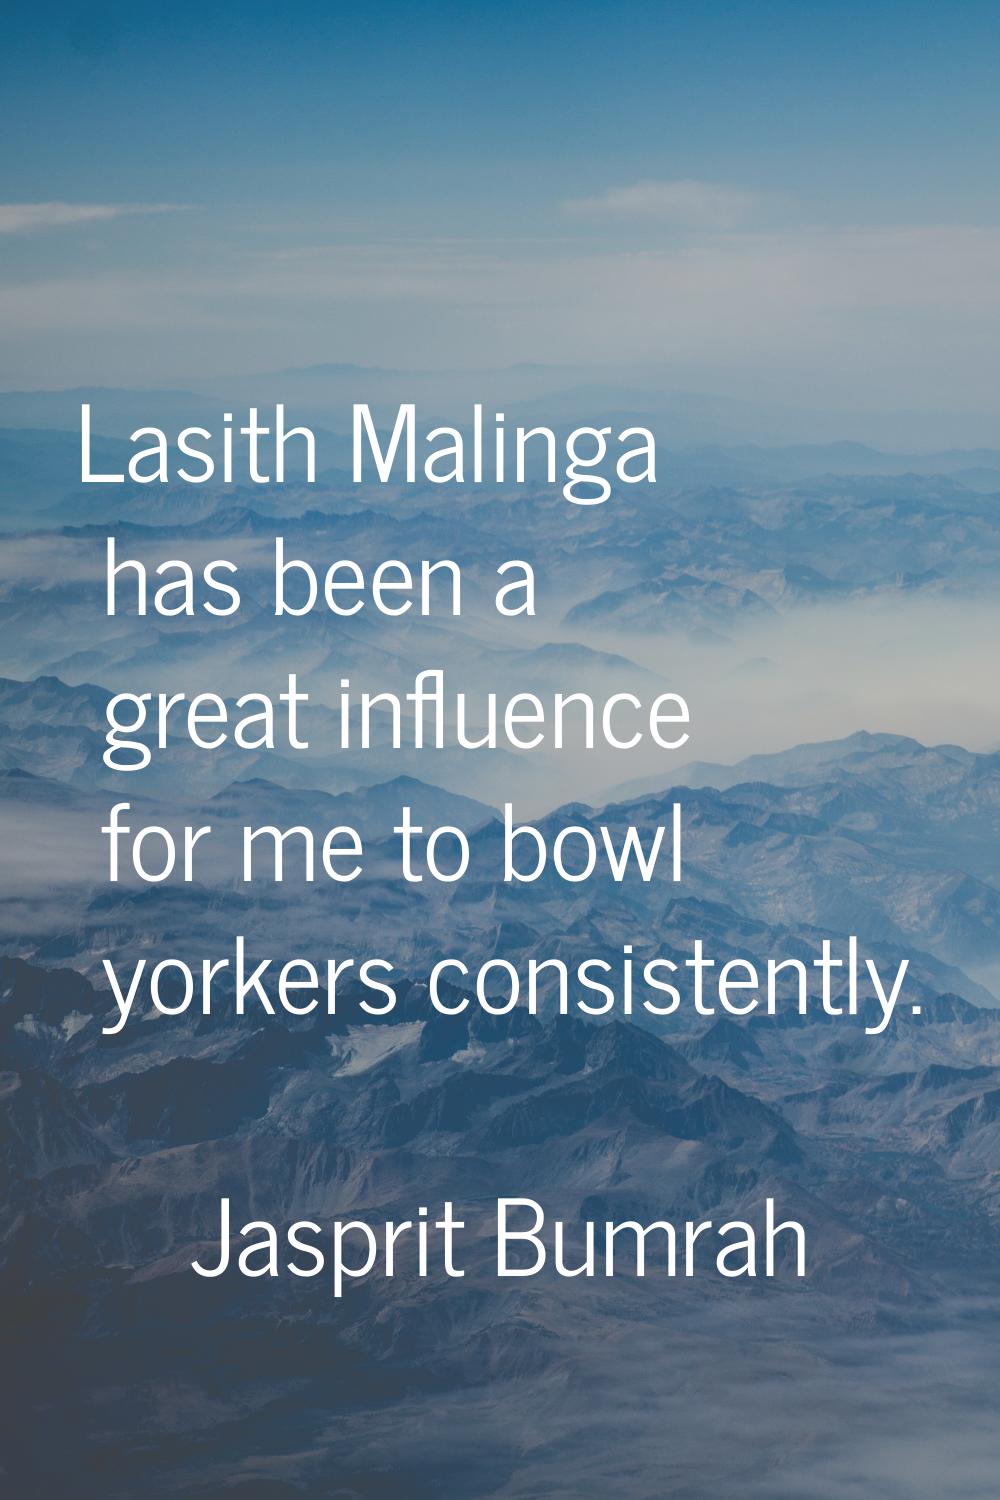 Lasith Malinga has been a great influence for me to bowl yorkers consistently.